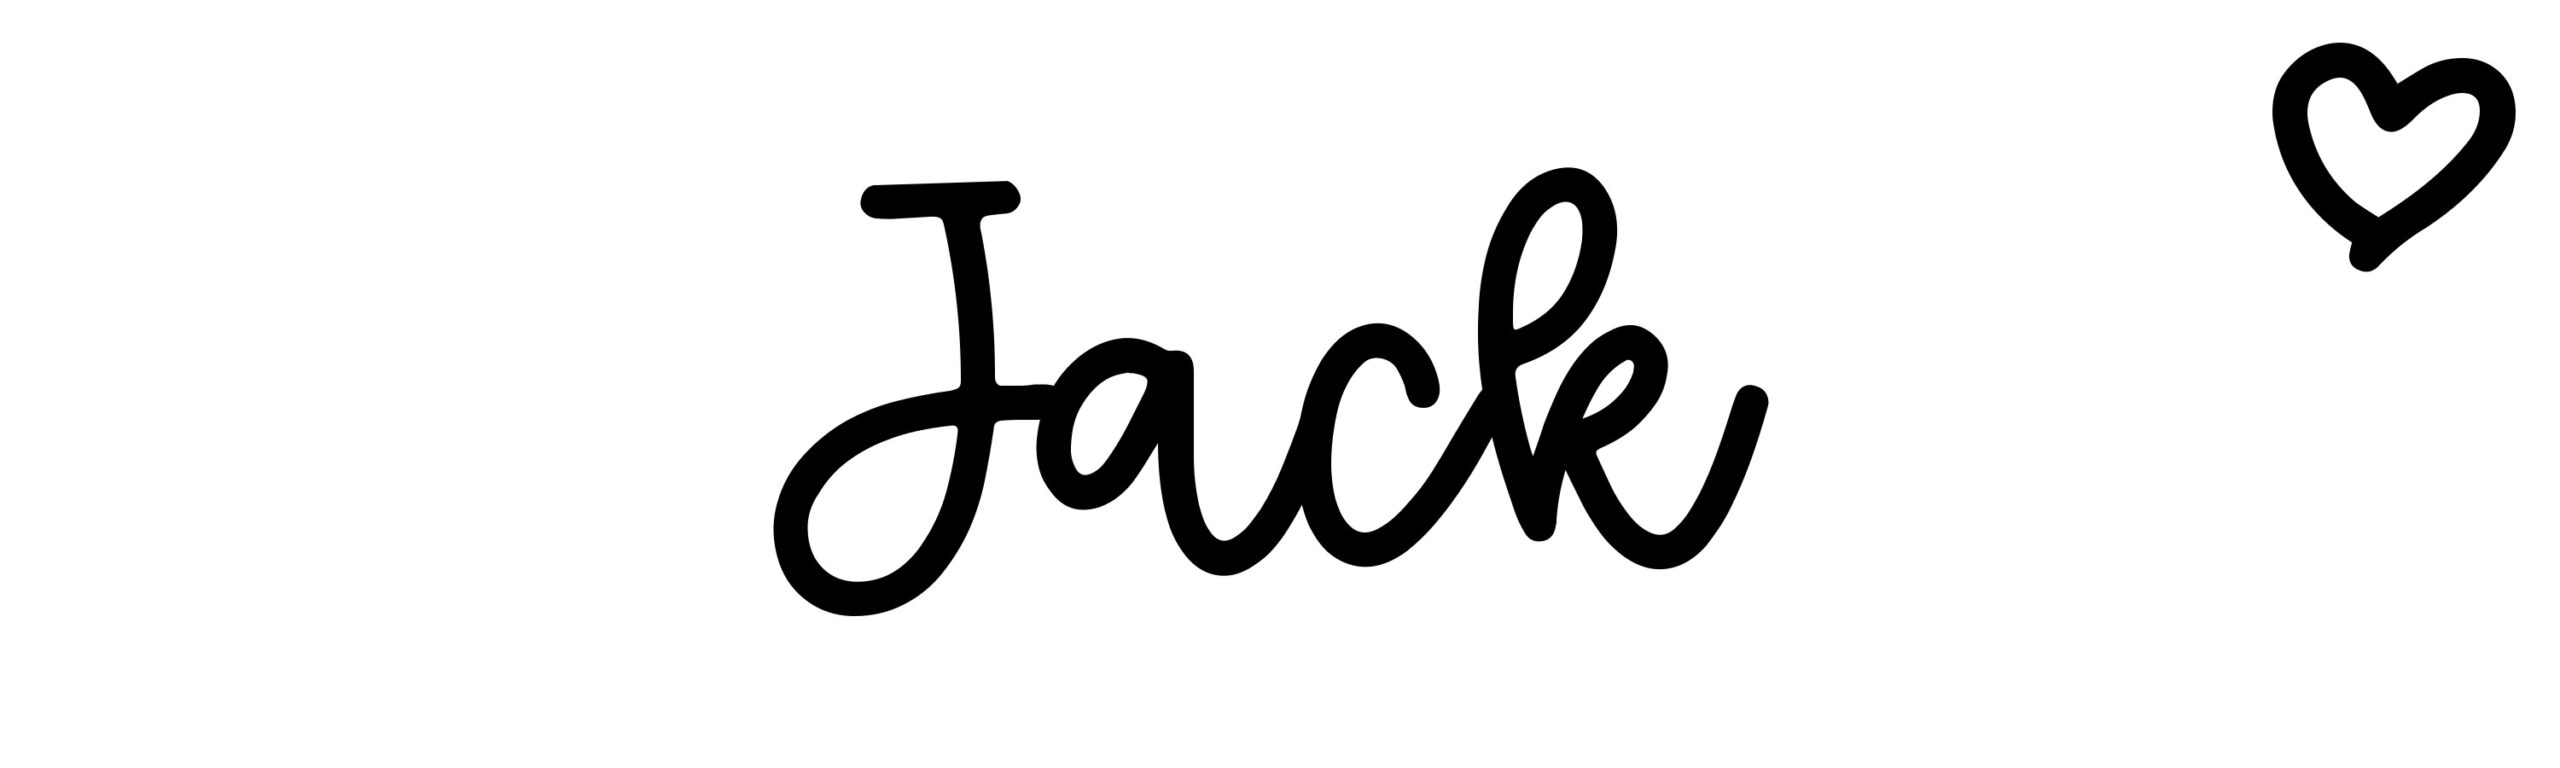 Jack - Name meaning, origin, variations and more